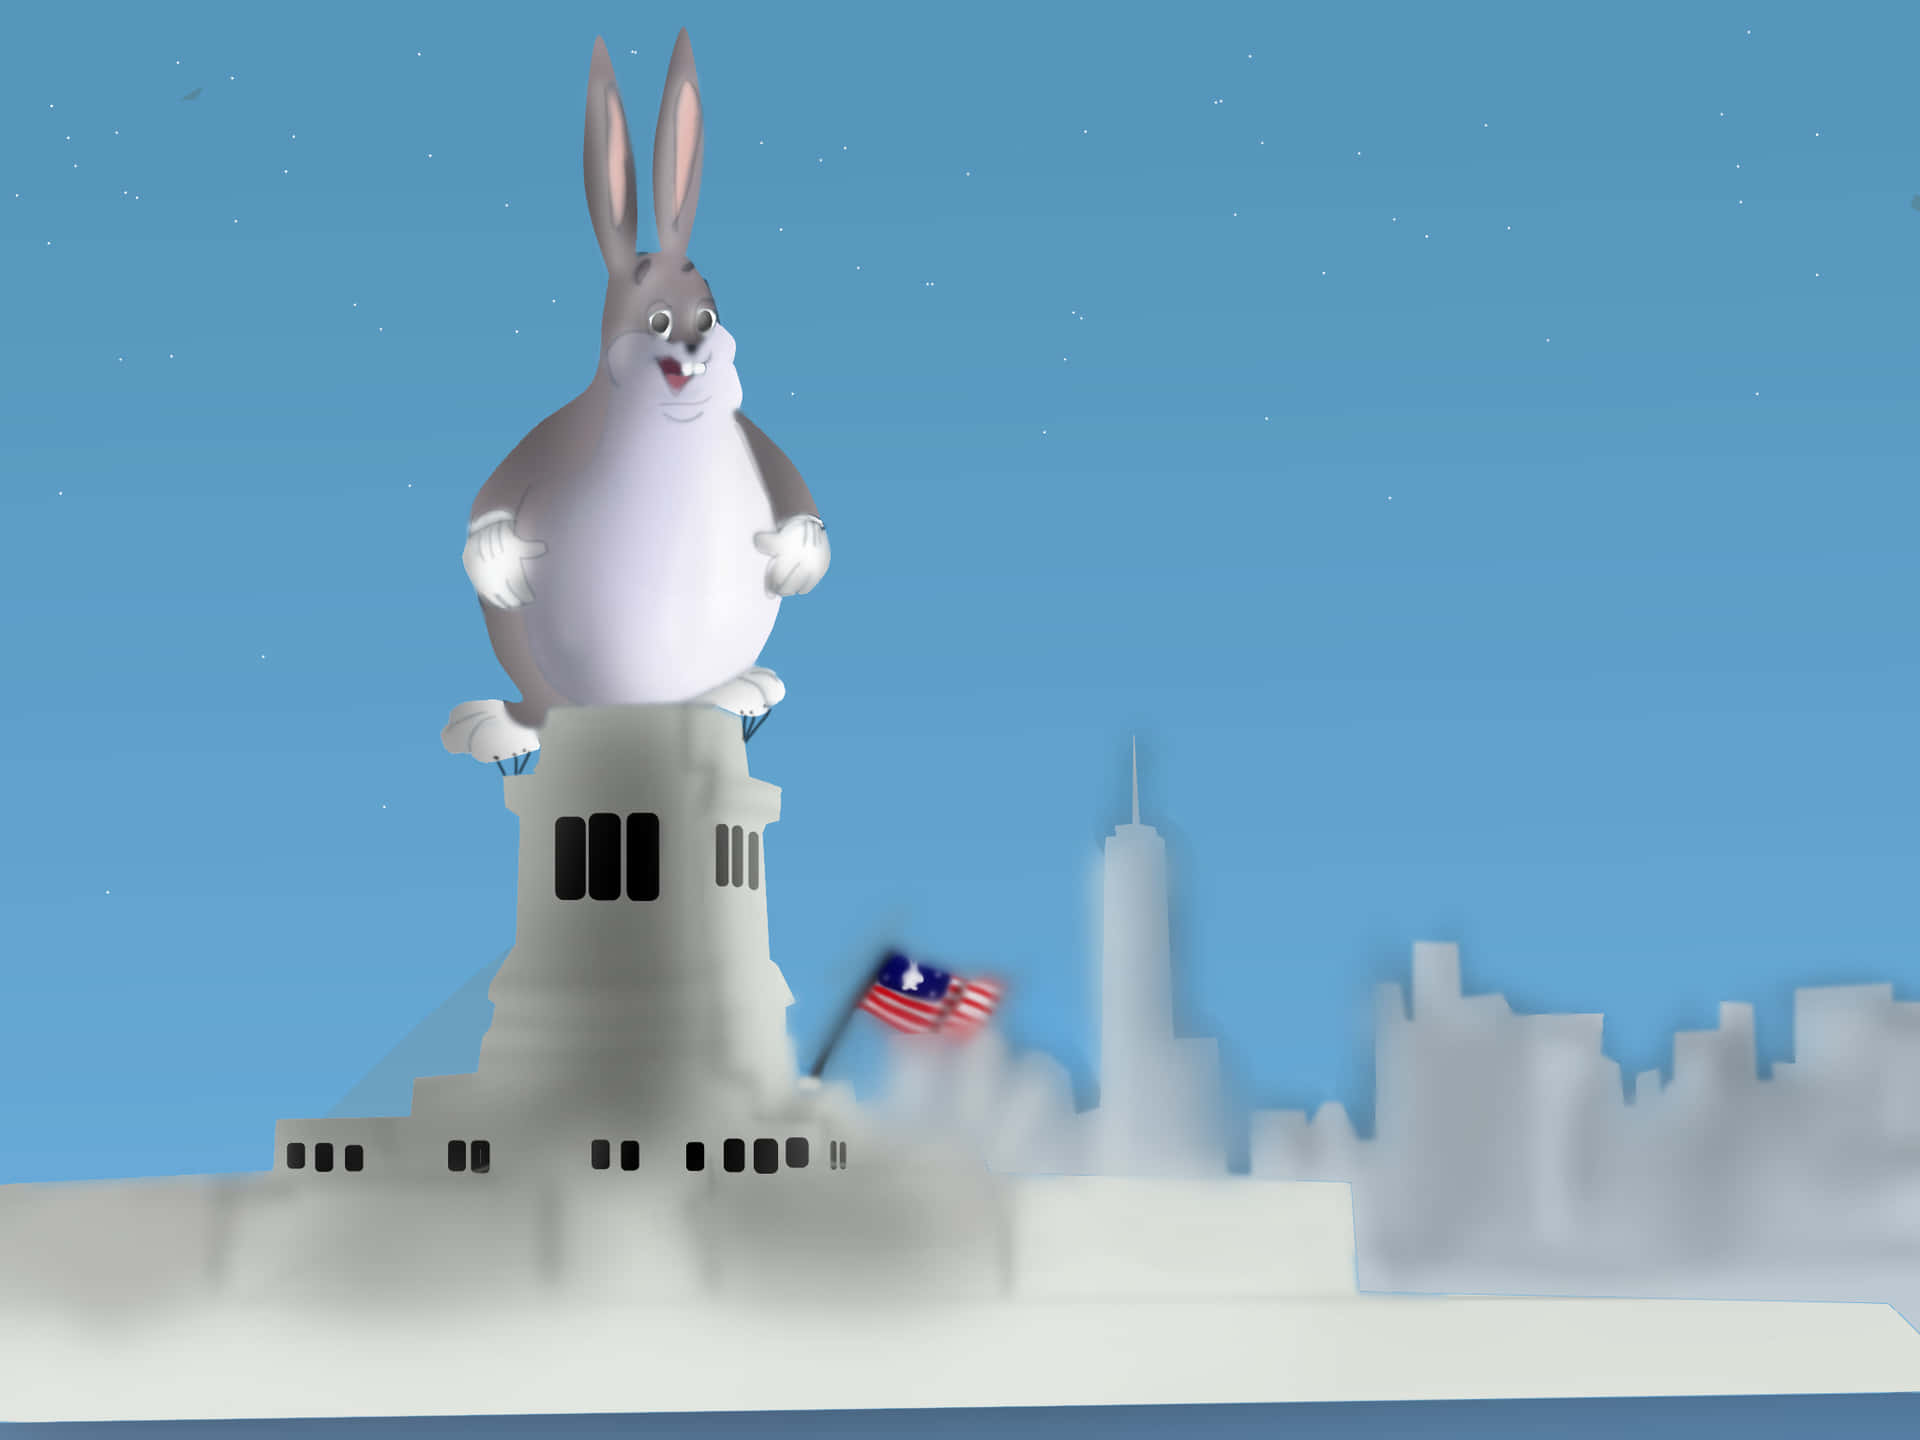 Big Chungus, The Biggest And Funniest Cartoon Bunny In The World Background